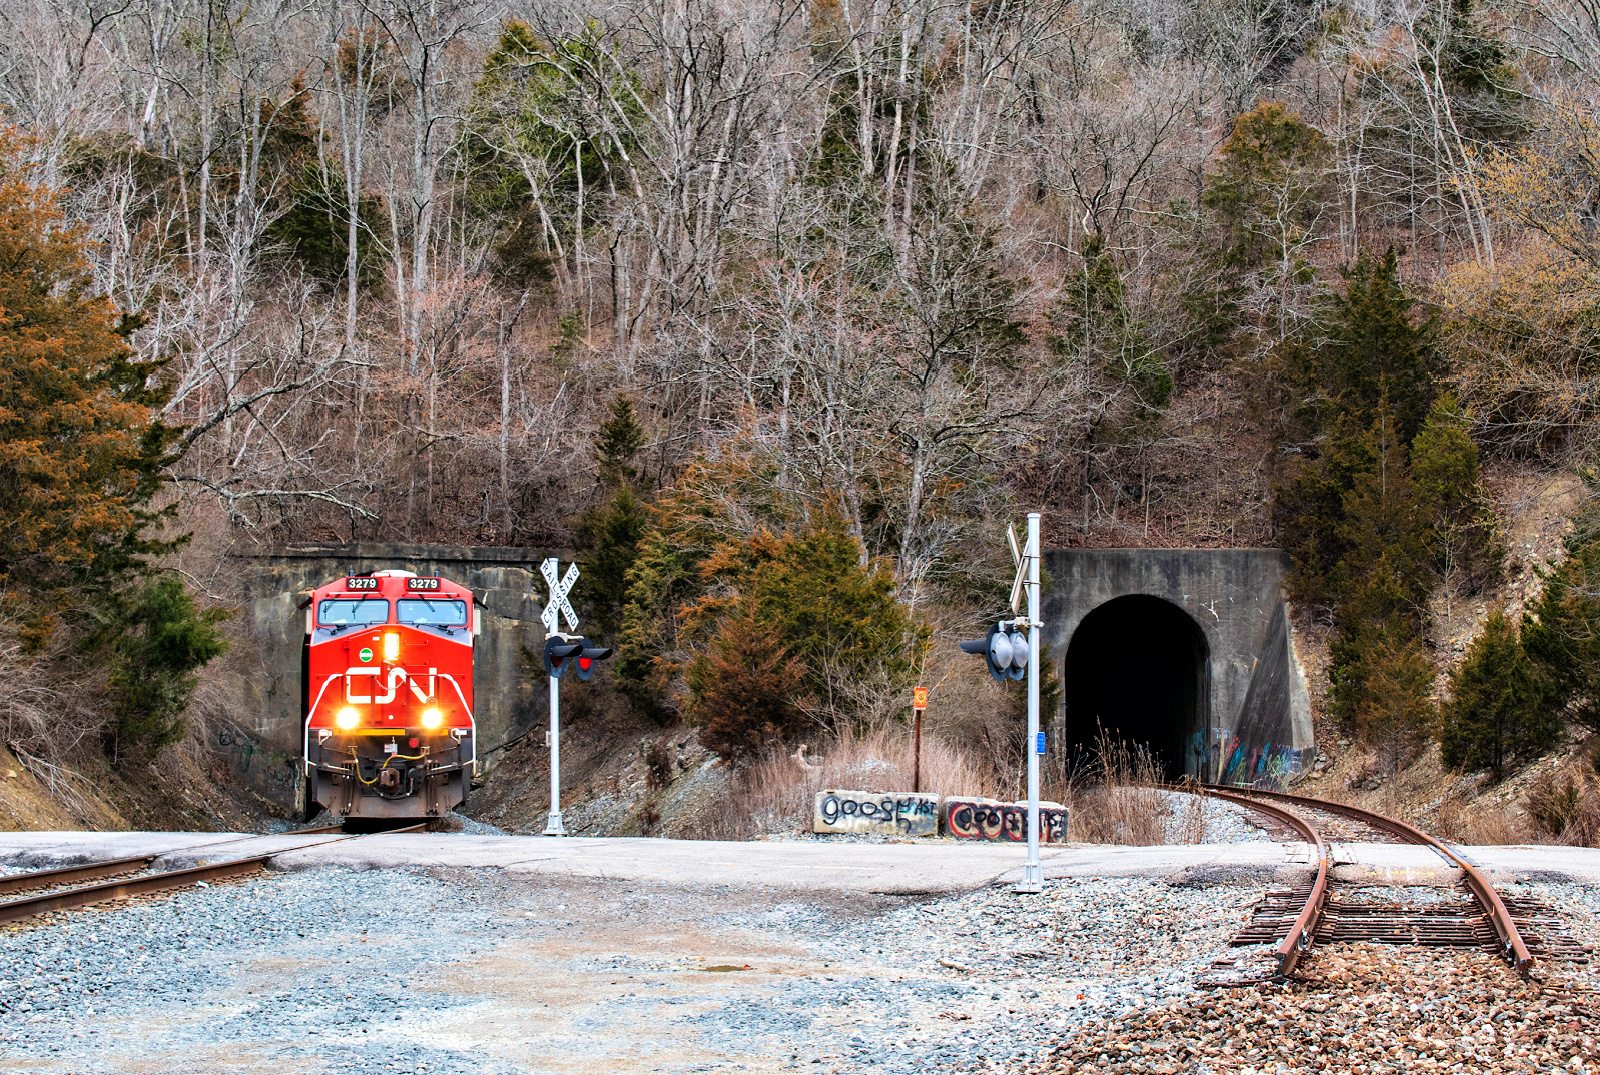 CN 3279 is a class GE ET44AC and  is pictured in Grants Bend, Kentucky, United States.  This was taken along the CC Subdivision on the CSX Transportation. Photo Copyright: David Rohdenburg uploaded to Railroad Gallery on 03/03/2023. This photograph of CN 3279 was taken on Tuesday, February 28, 2023. All Rights Reserved. 